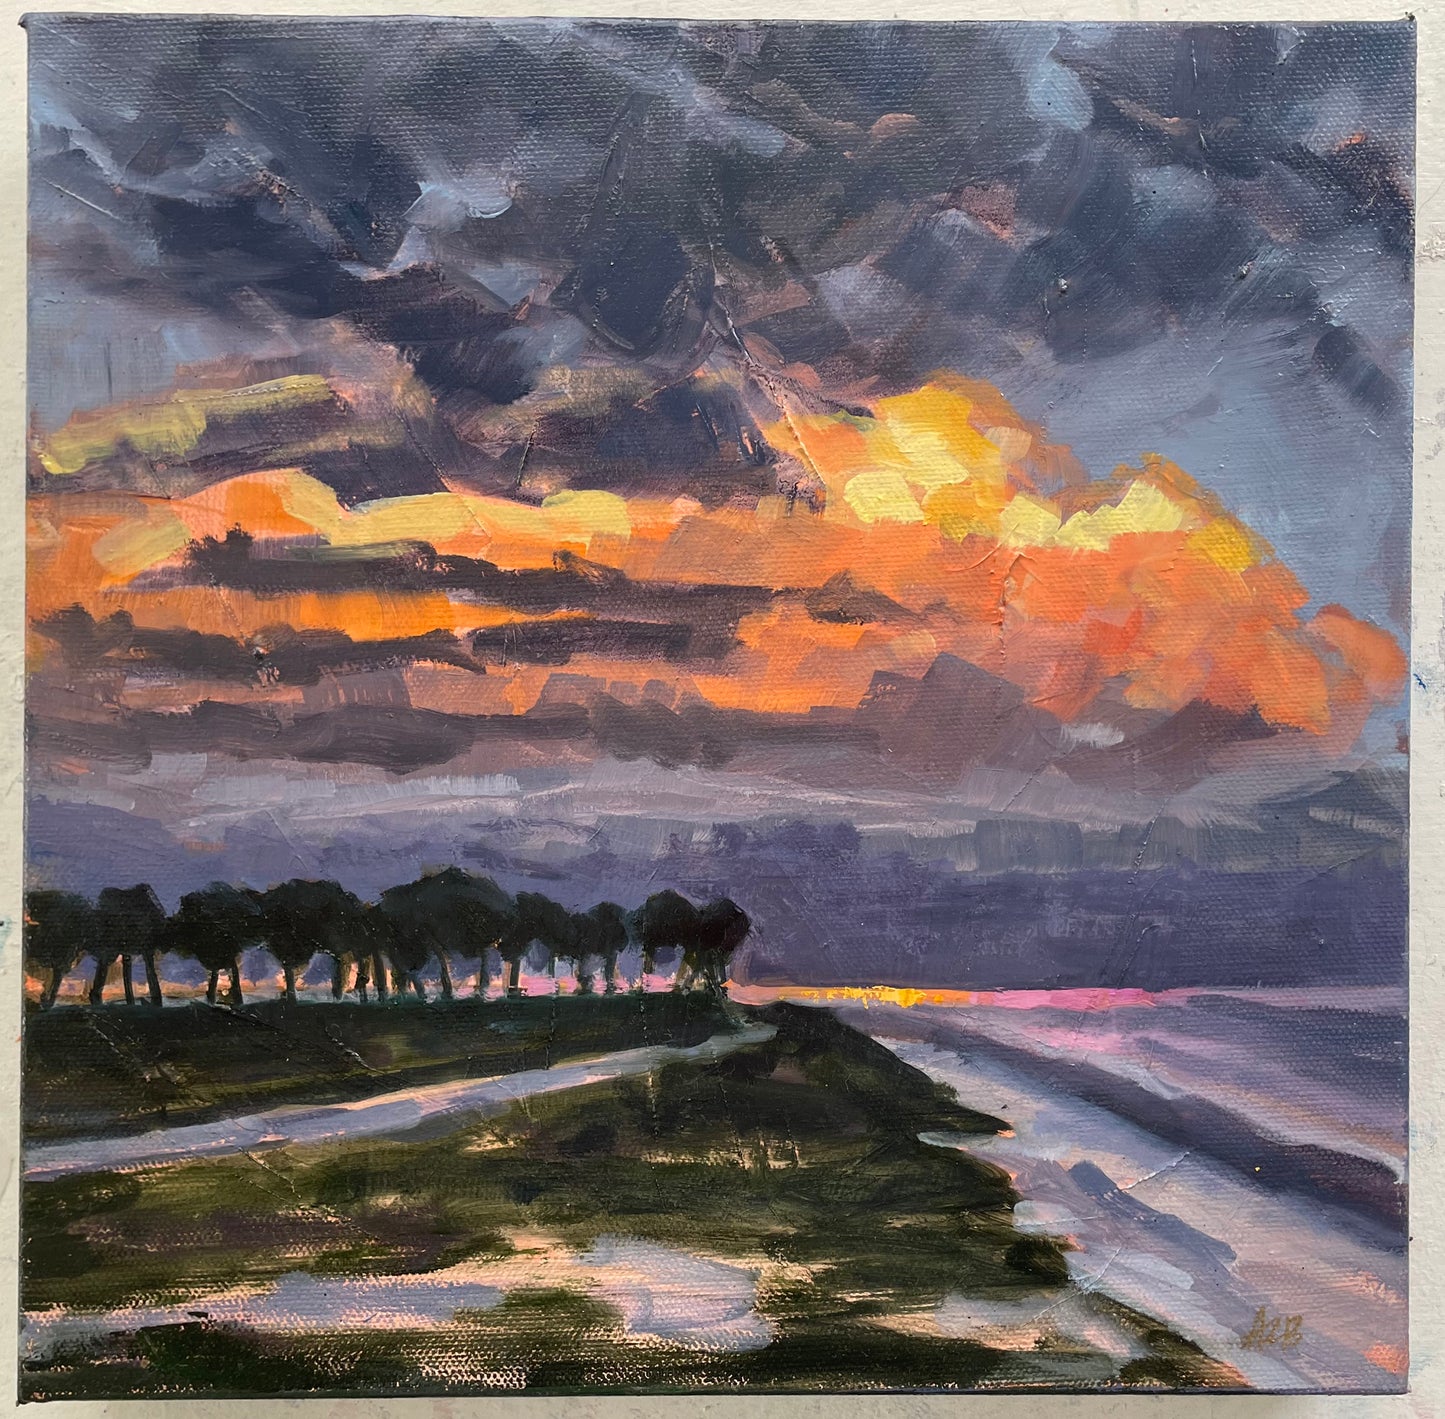 Sunset over the Palms, 12x12 inches